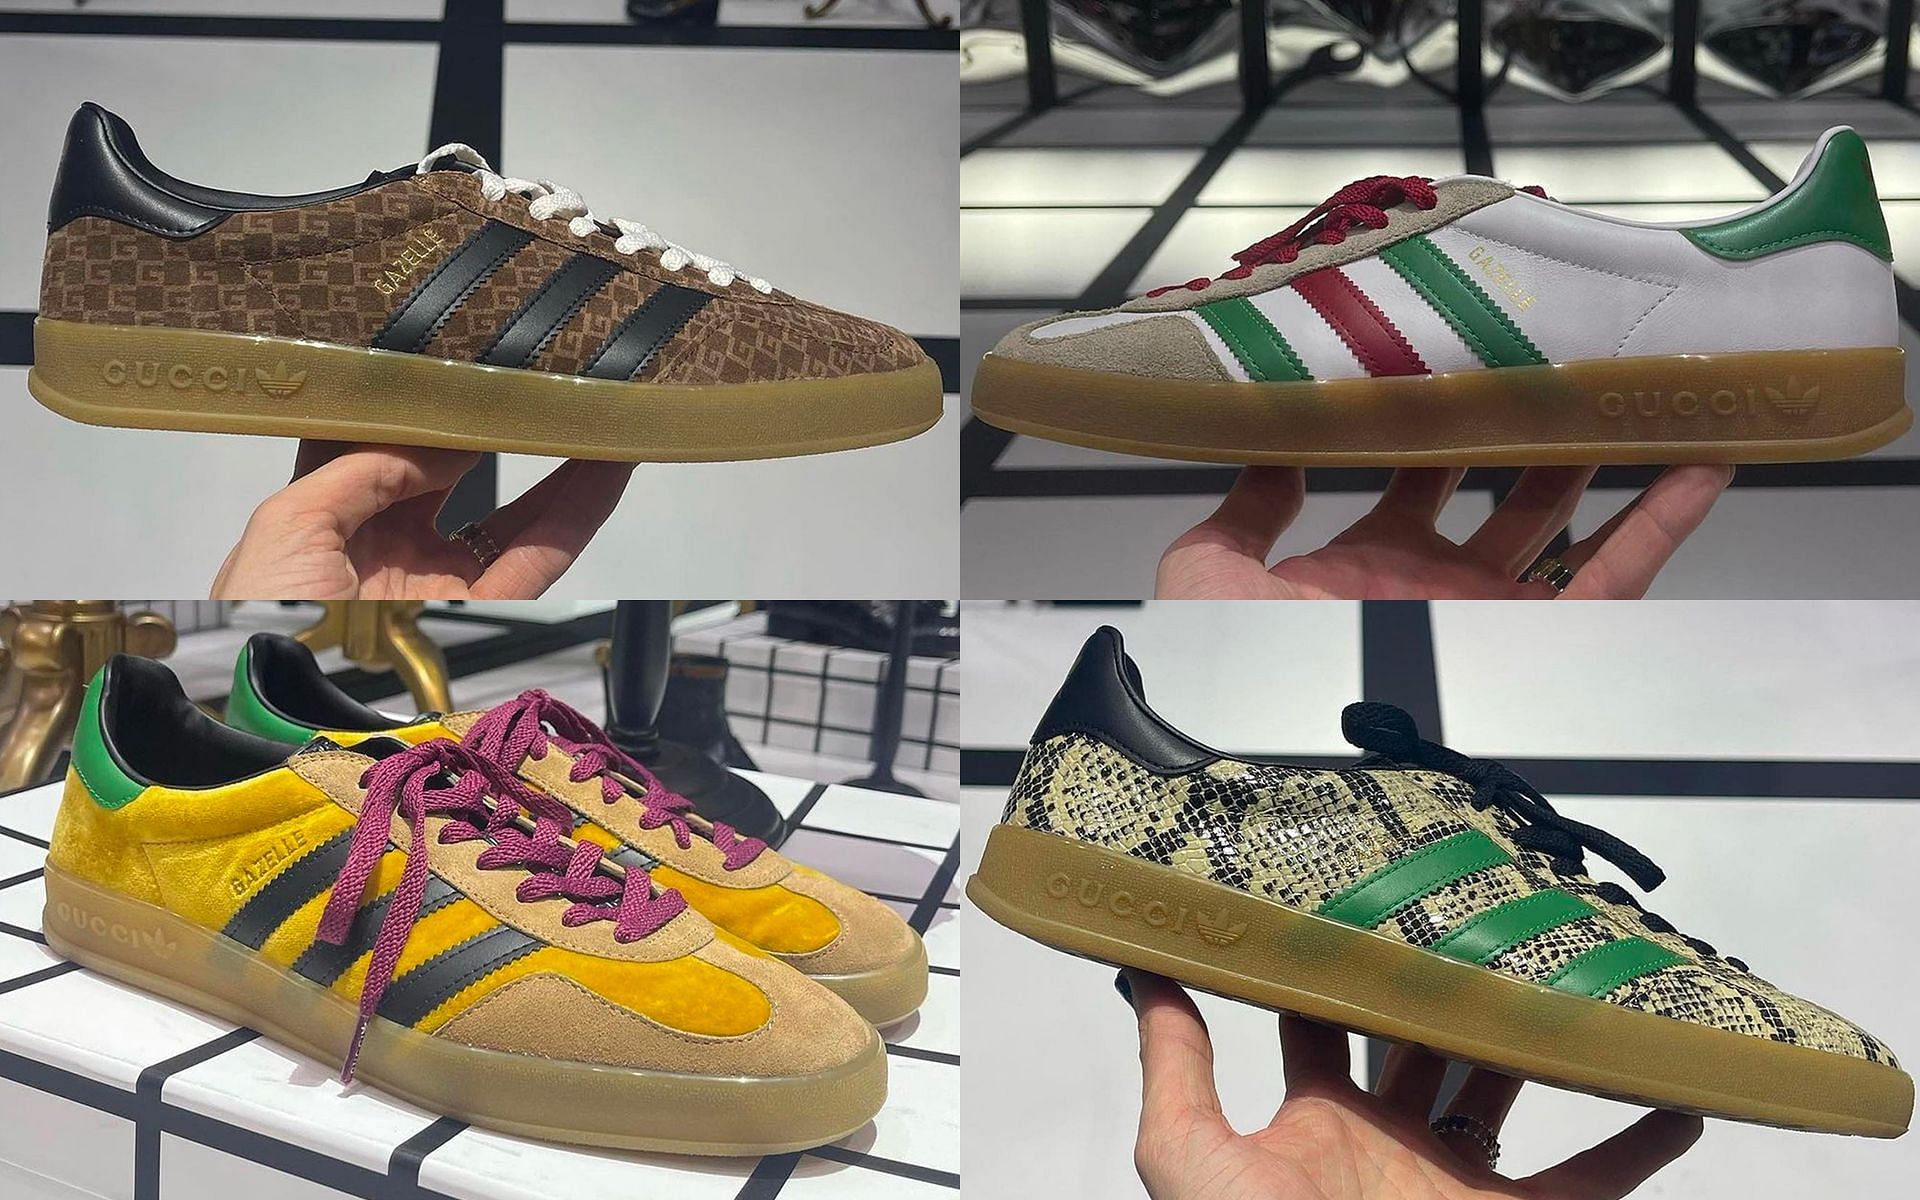 Adidas X Gucci Collab, Shoes, Price, Release Date: Timeline | vlr.eng.br